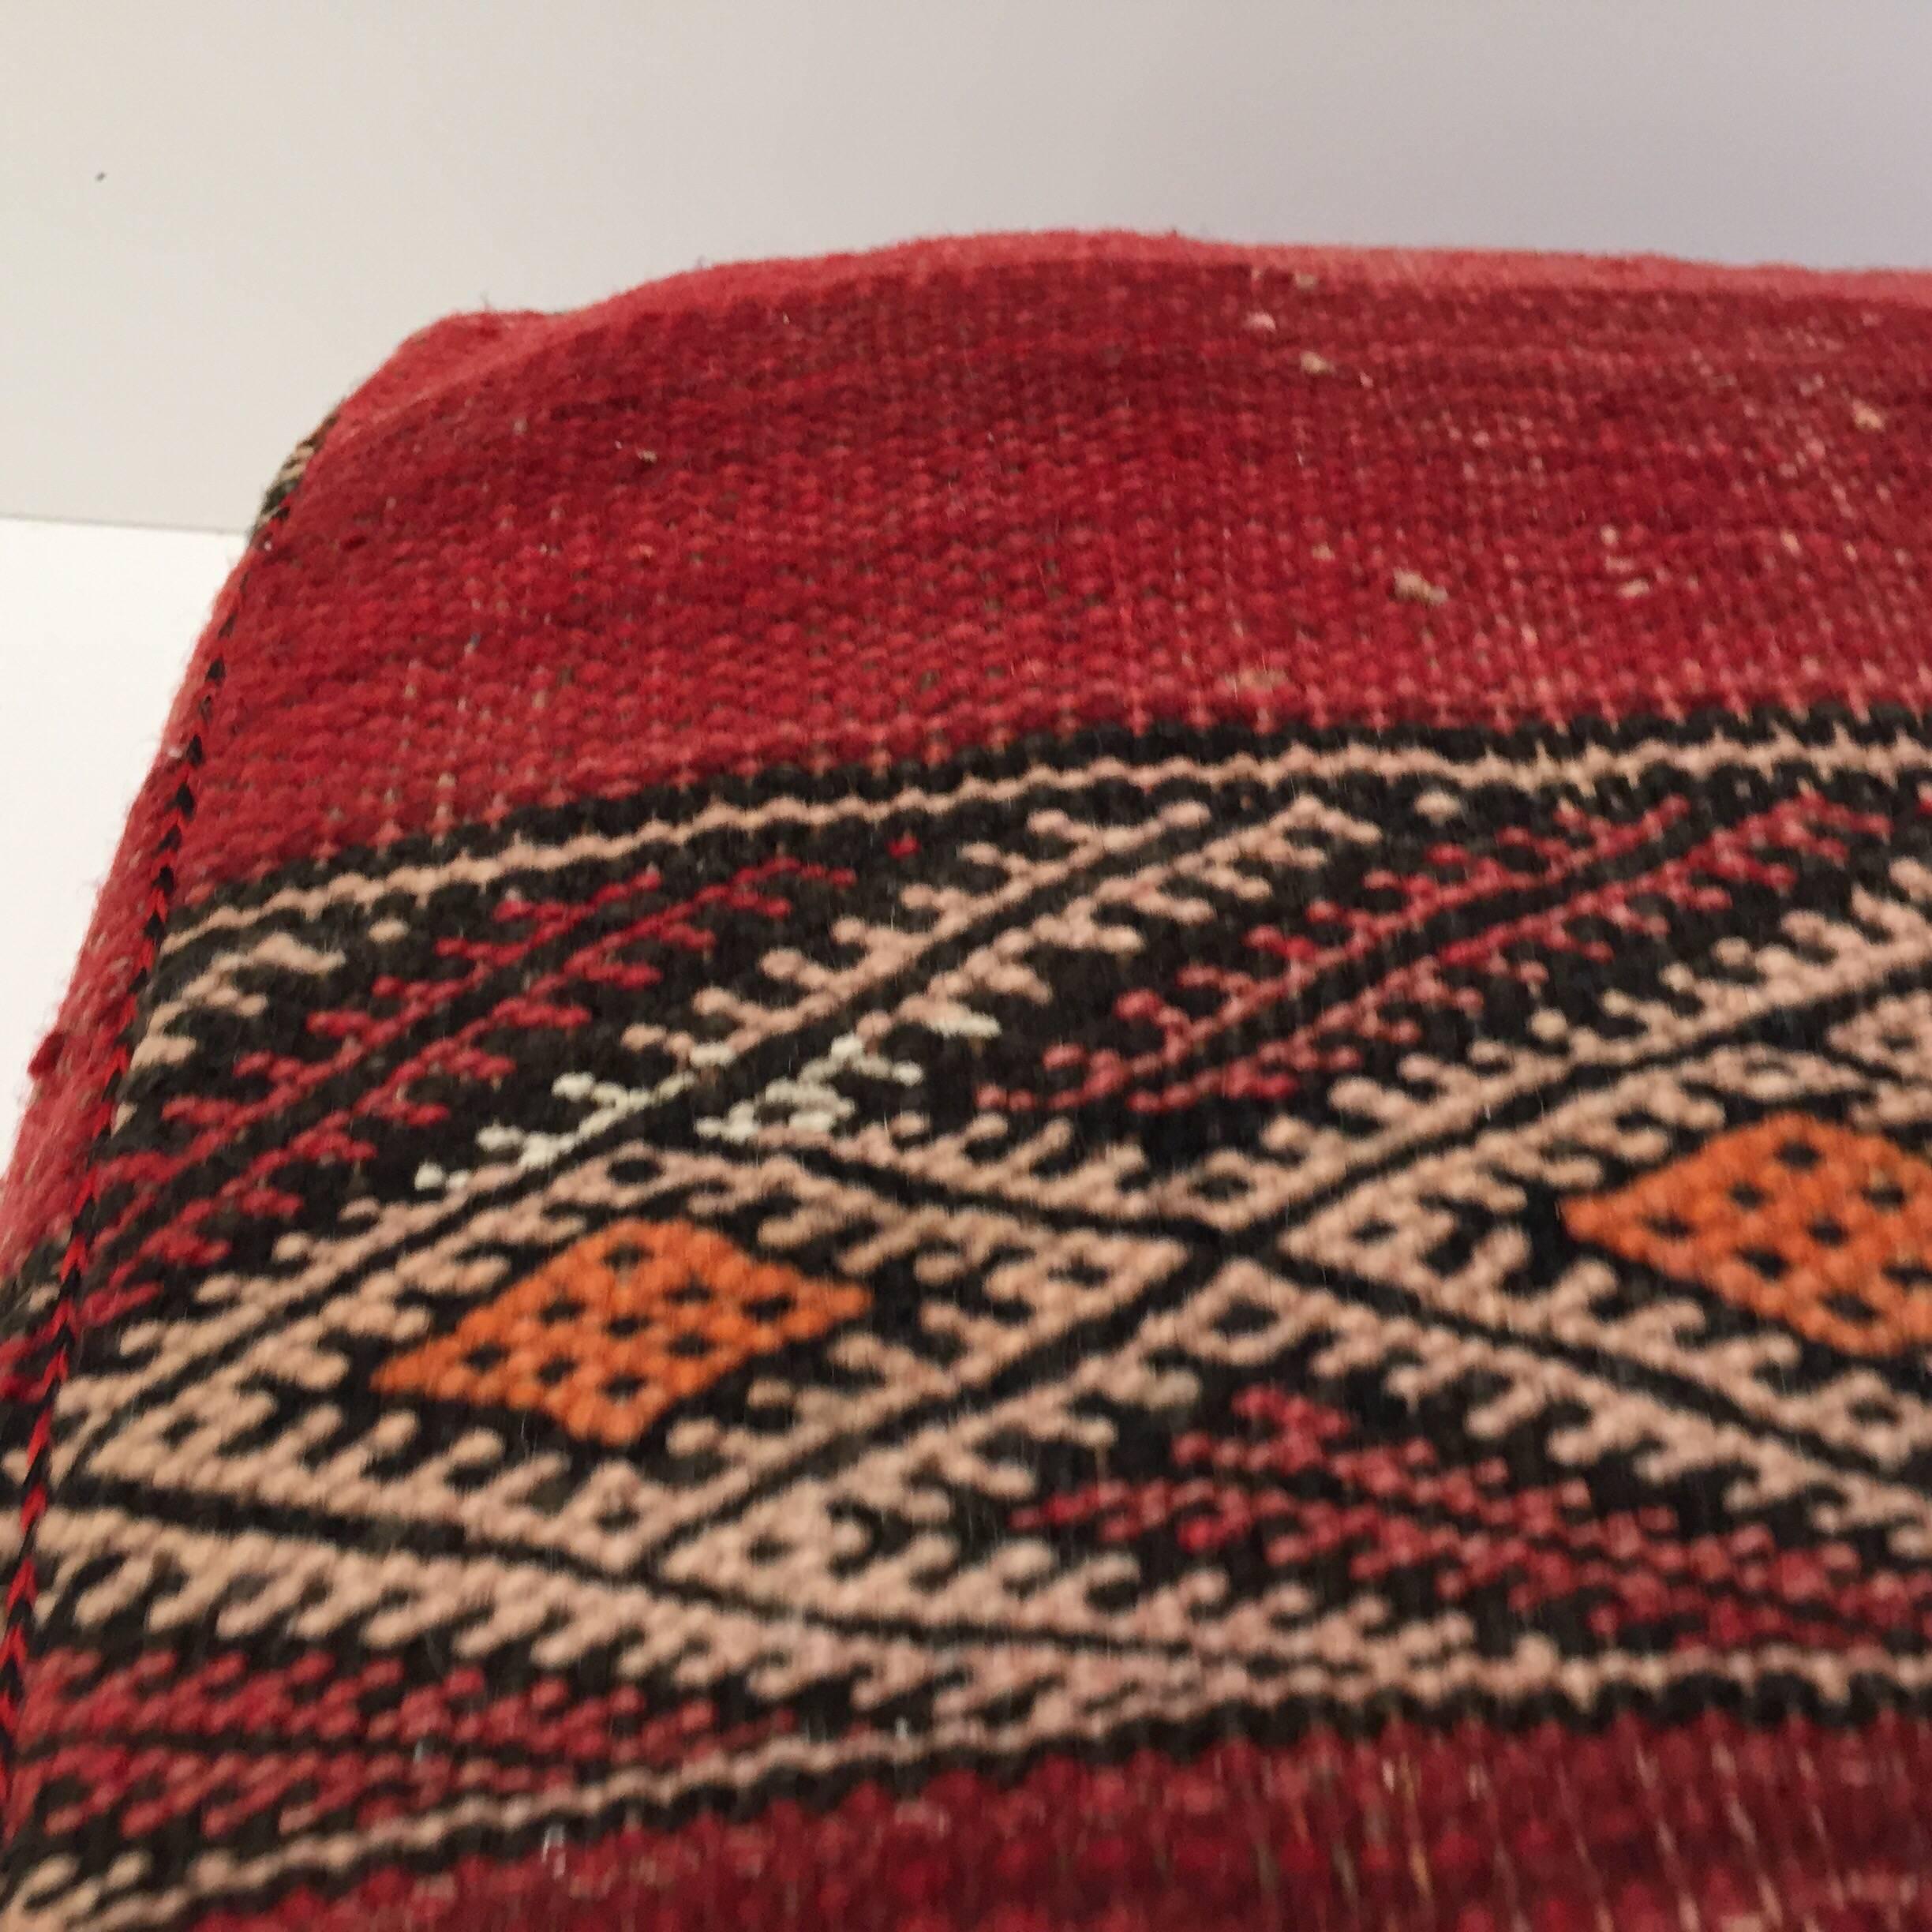 20th Century Moroccan Floor Pillow Tribal Seat Cushion Made from a Vintage Berber Rug